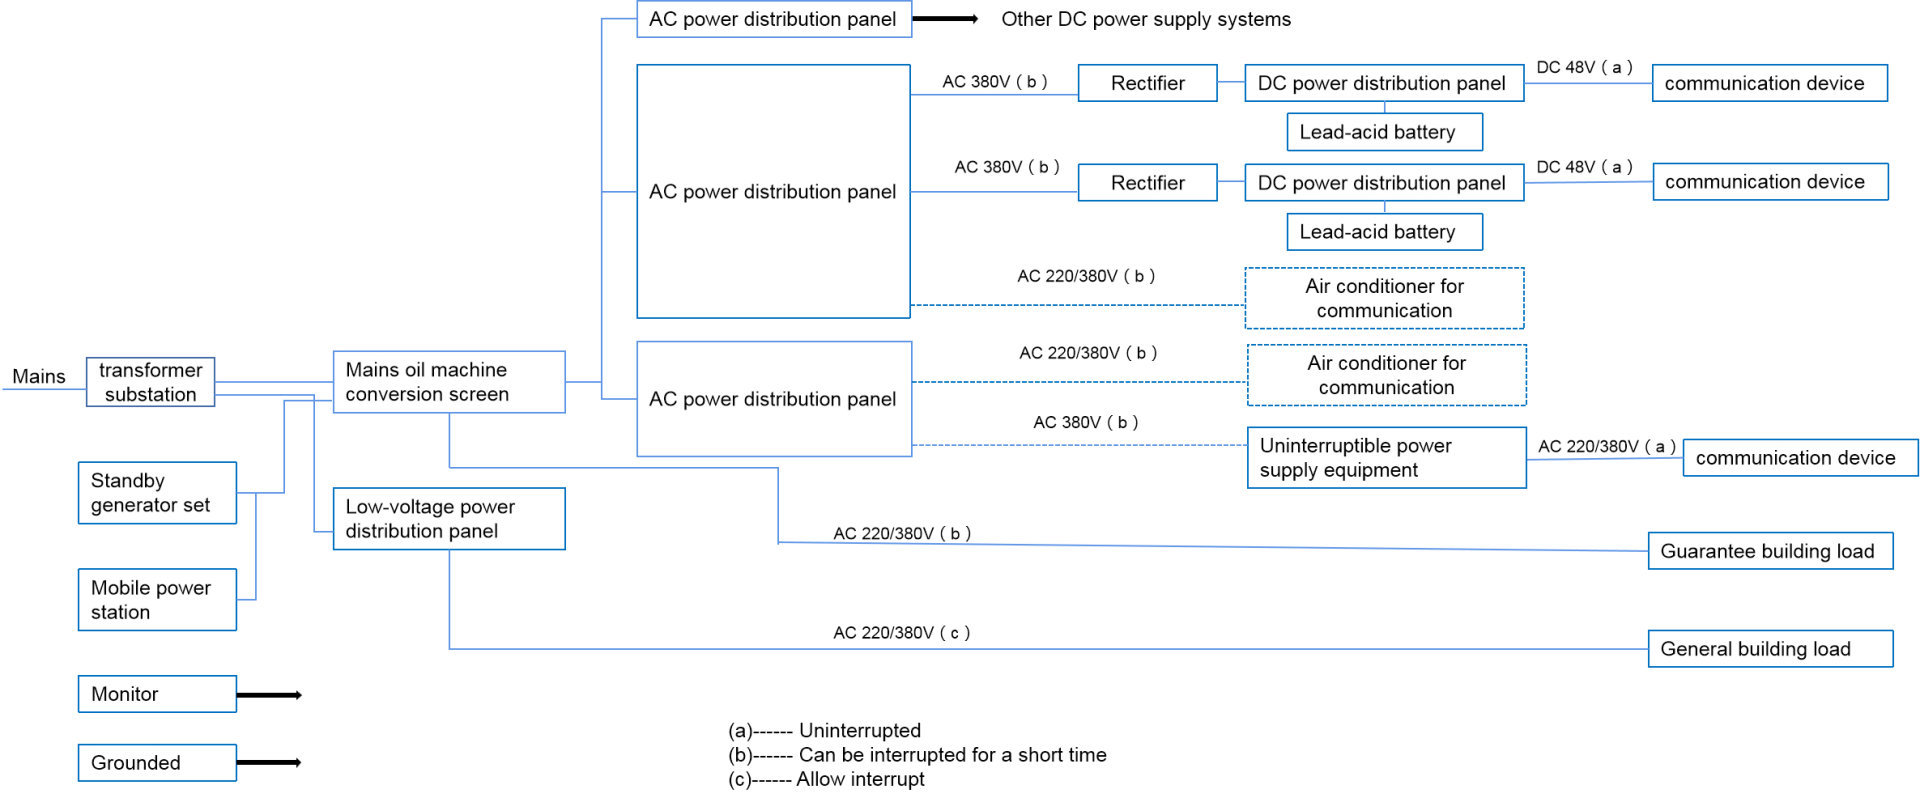 Distributed power supply system - INVT Power